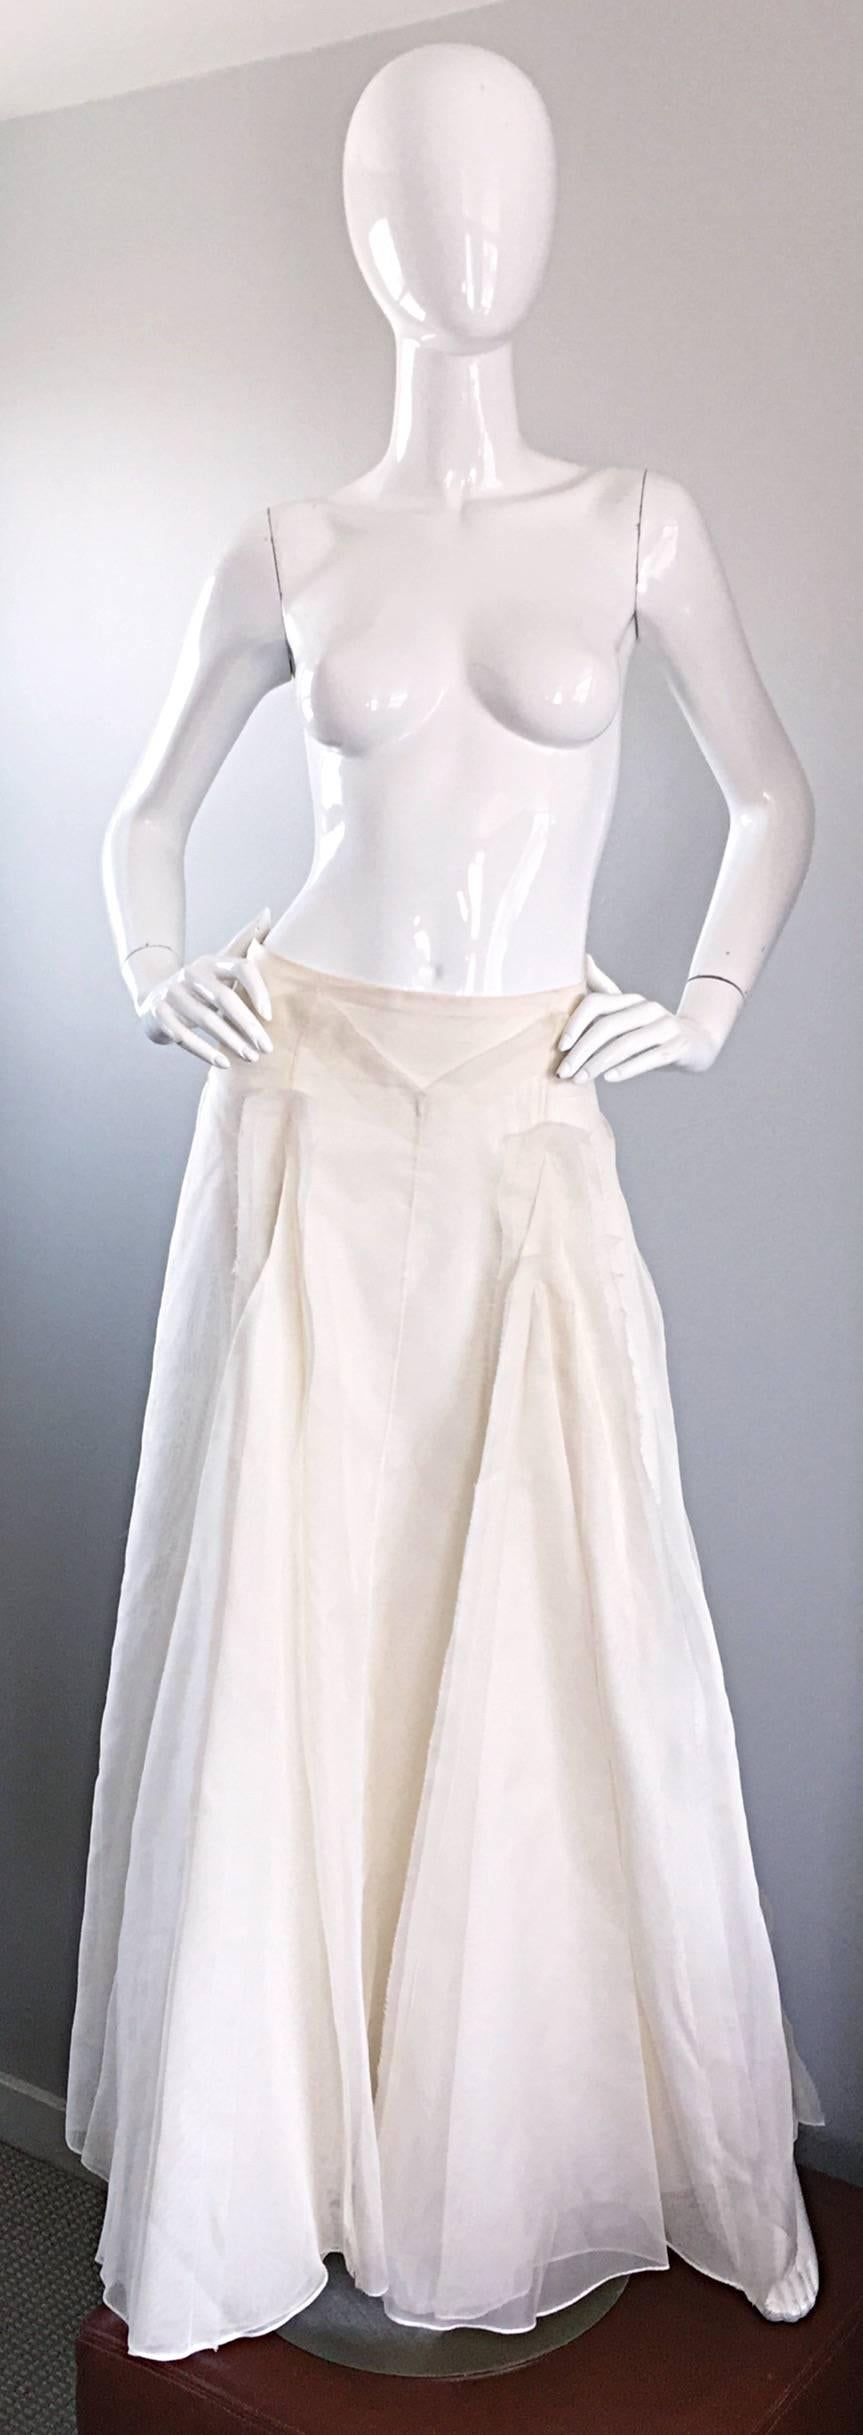 Stunning vintage CAROLINA HERRERA off-white/ivory ball skirt! Dramatic layers of chiffon and the finest silk faille make for an extra full skirt! Features hand-sewn chiffon patches on each panel. Slimming waist details. Hidden zipper up the side